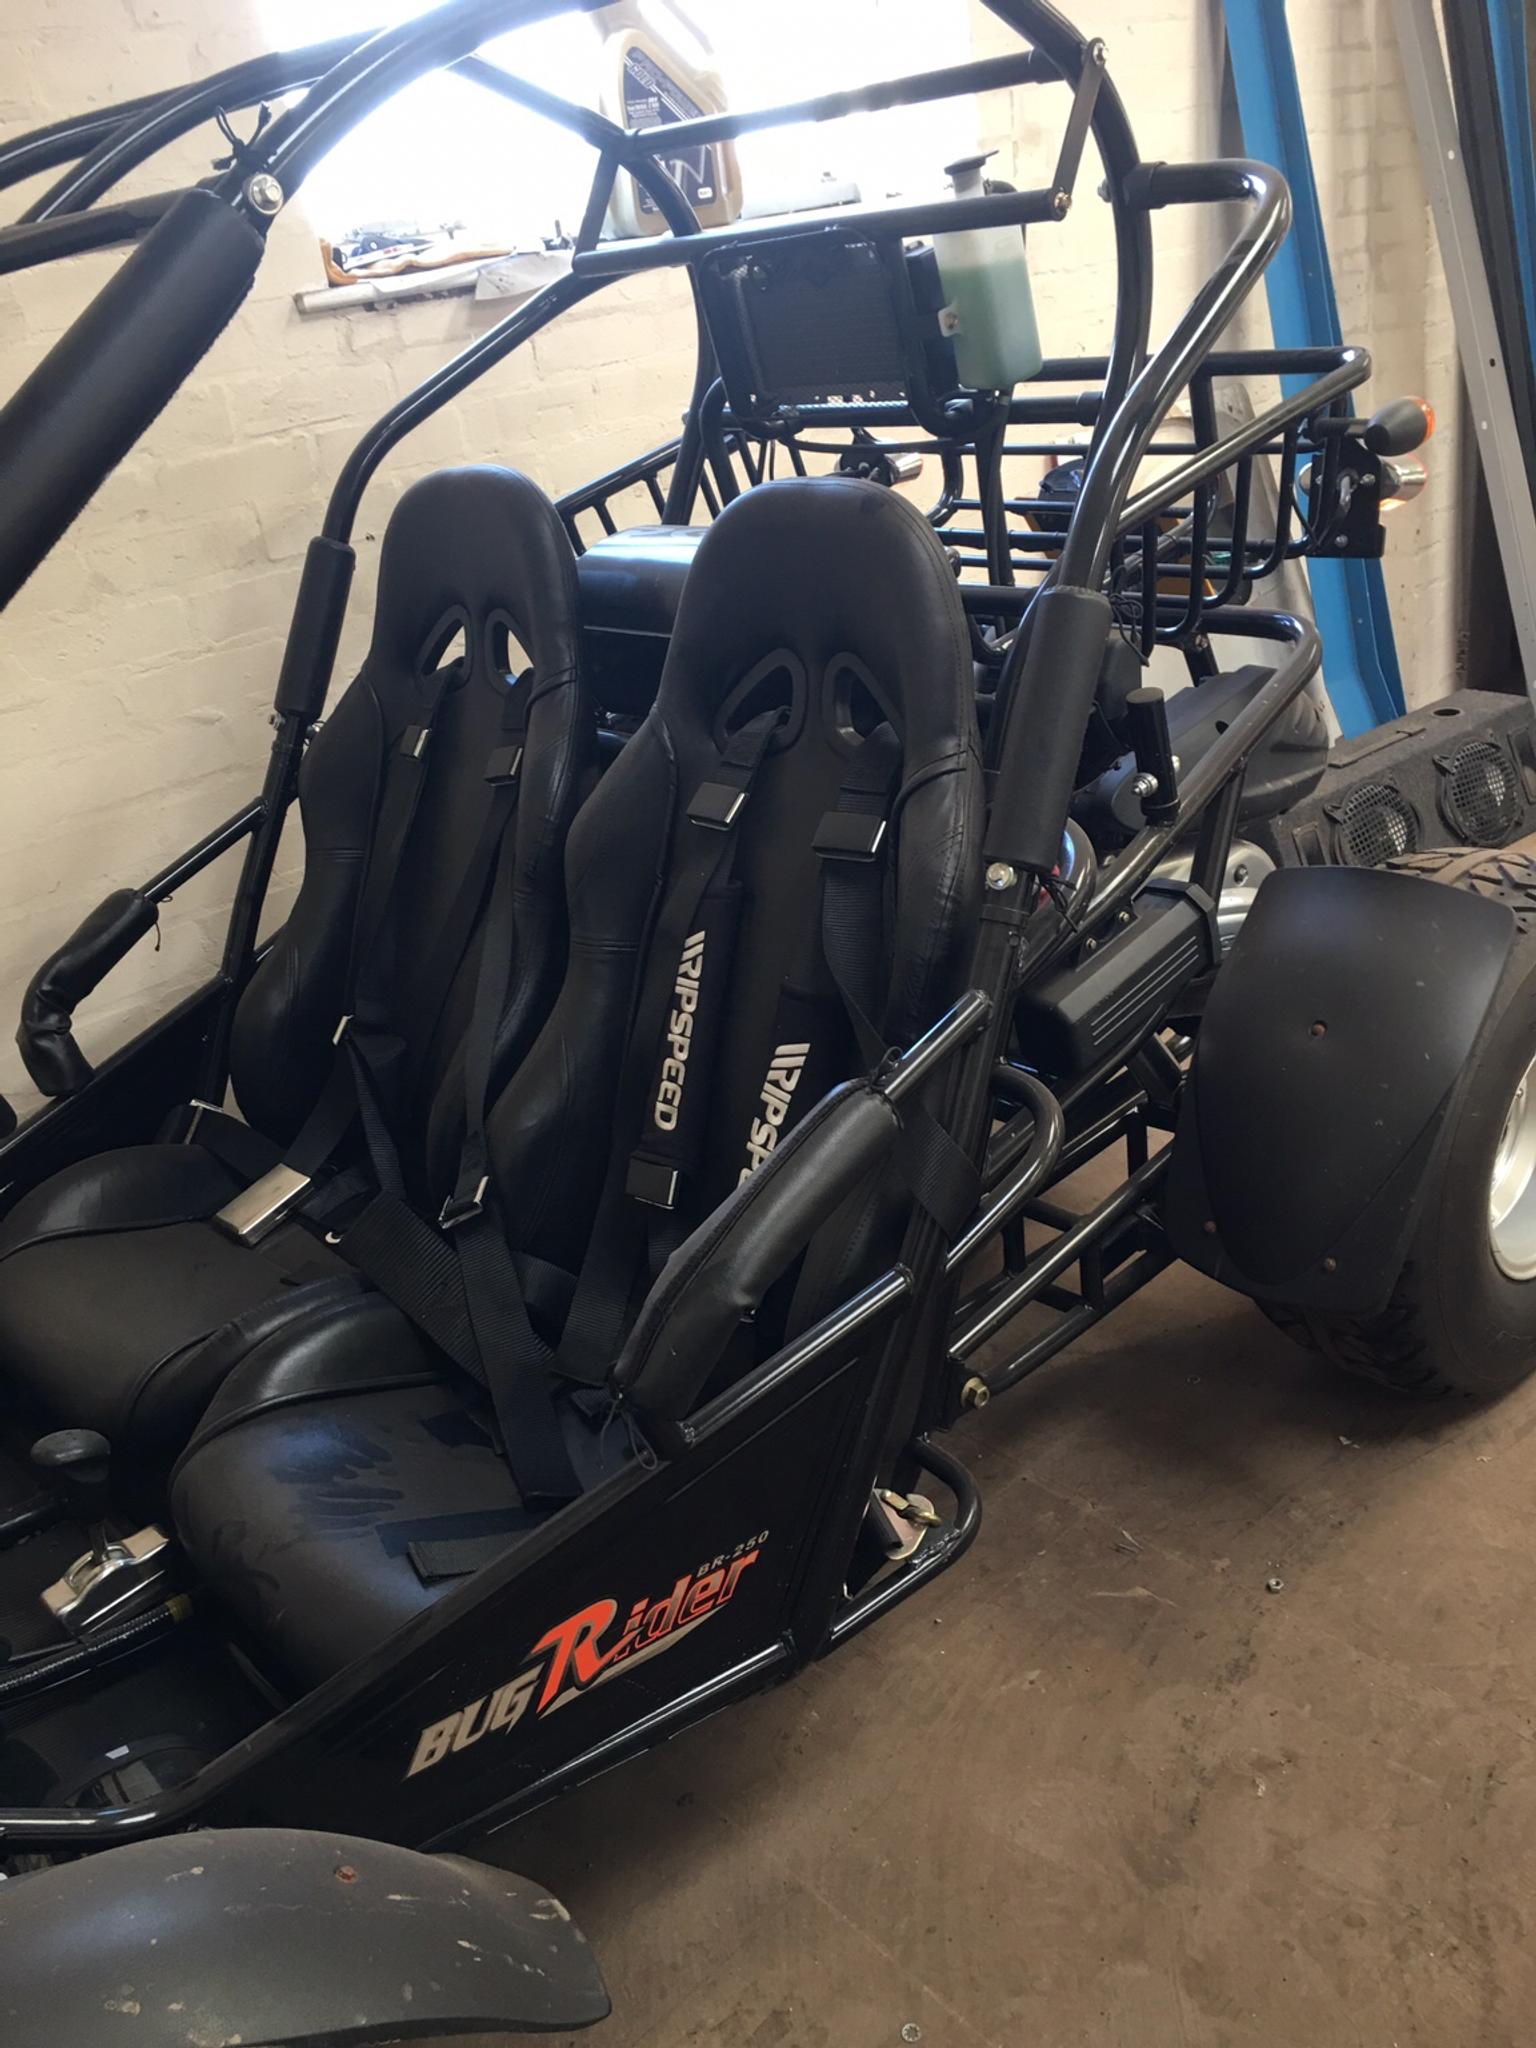 used road legal buggy for sale uk